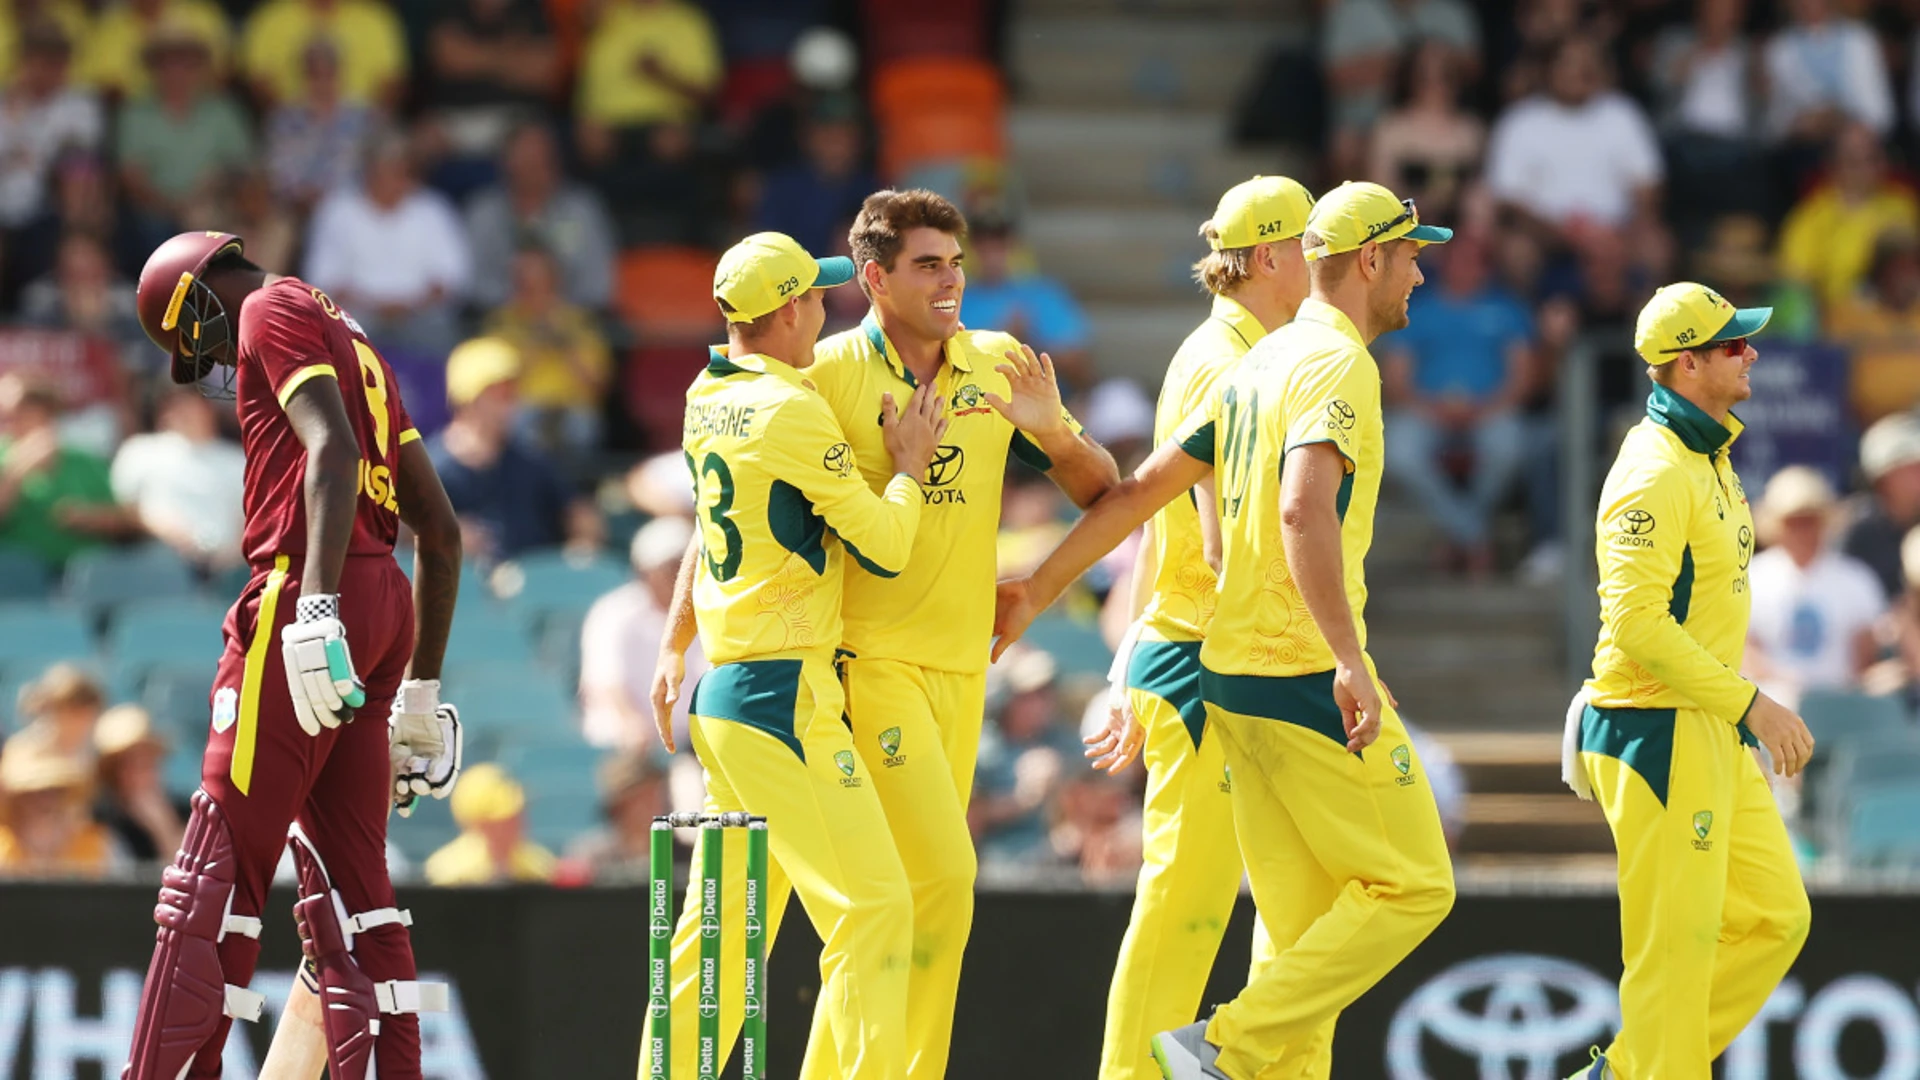 Australia take just 6.5 overs to destroy woeful West Indies in 3rd ODI